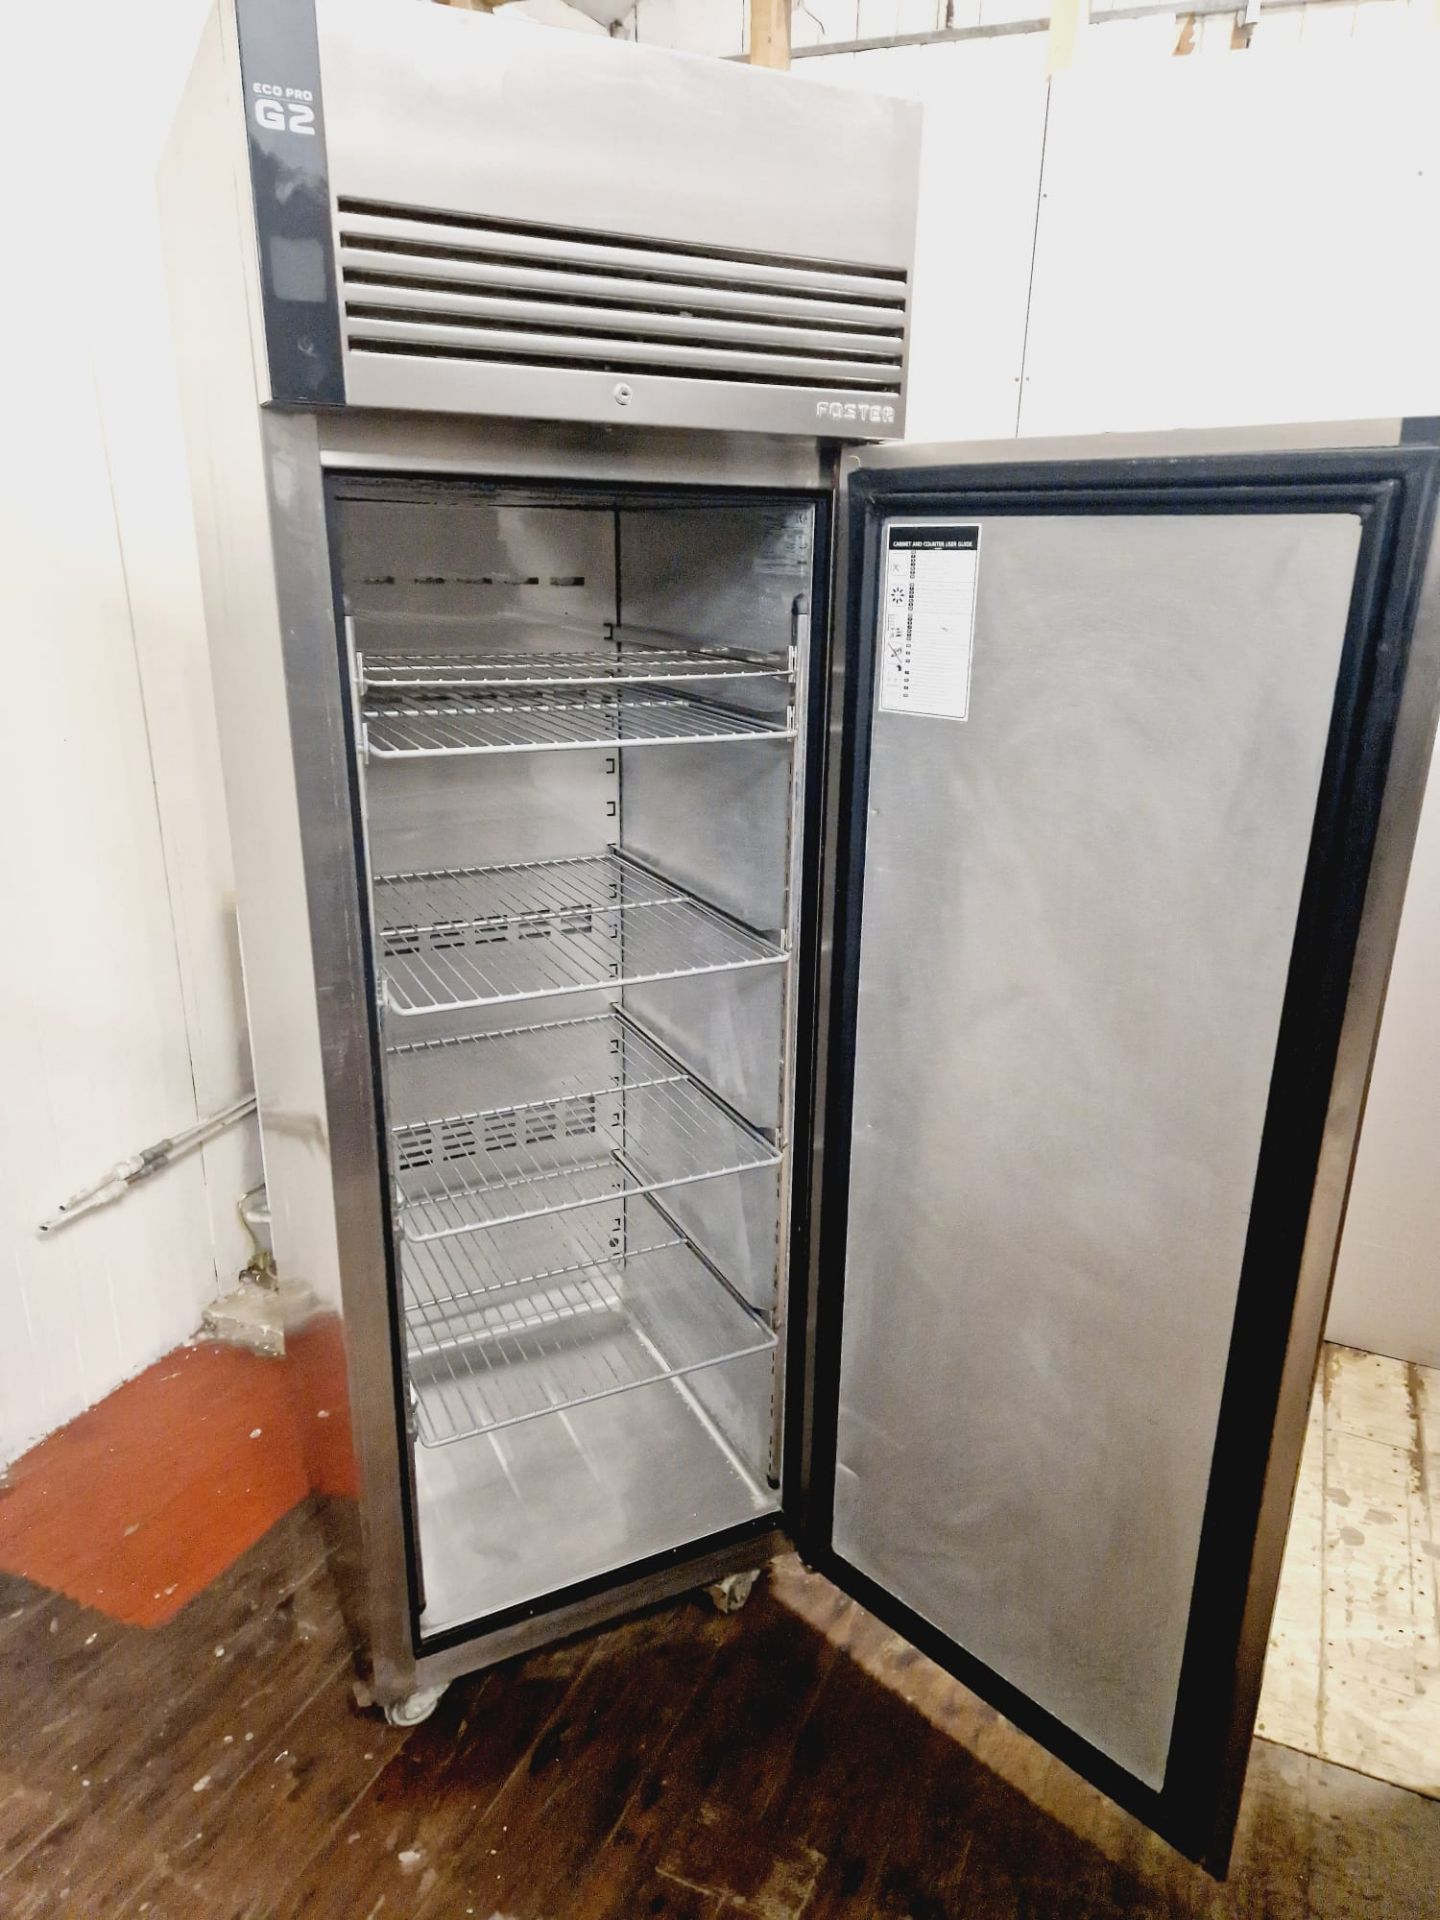 FOSTER G2 UPRIGHT FRIDGE FULLY WORKING  AND SERVICED - Image 3 of 4